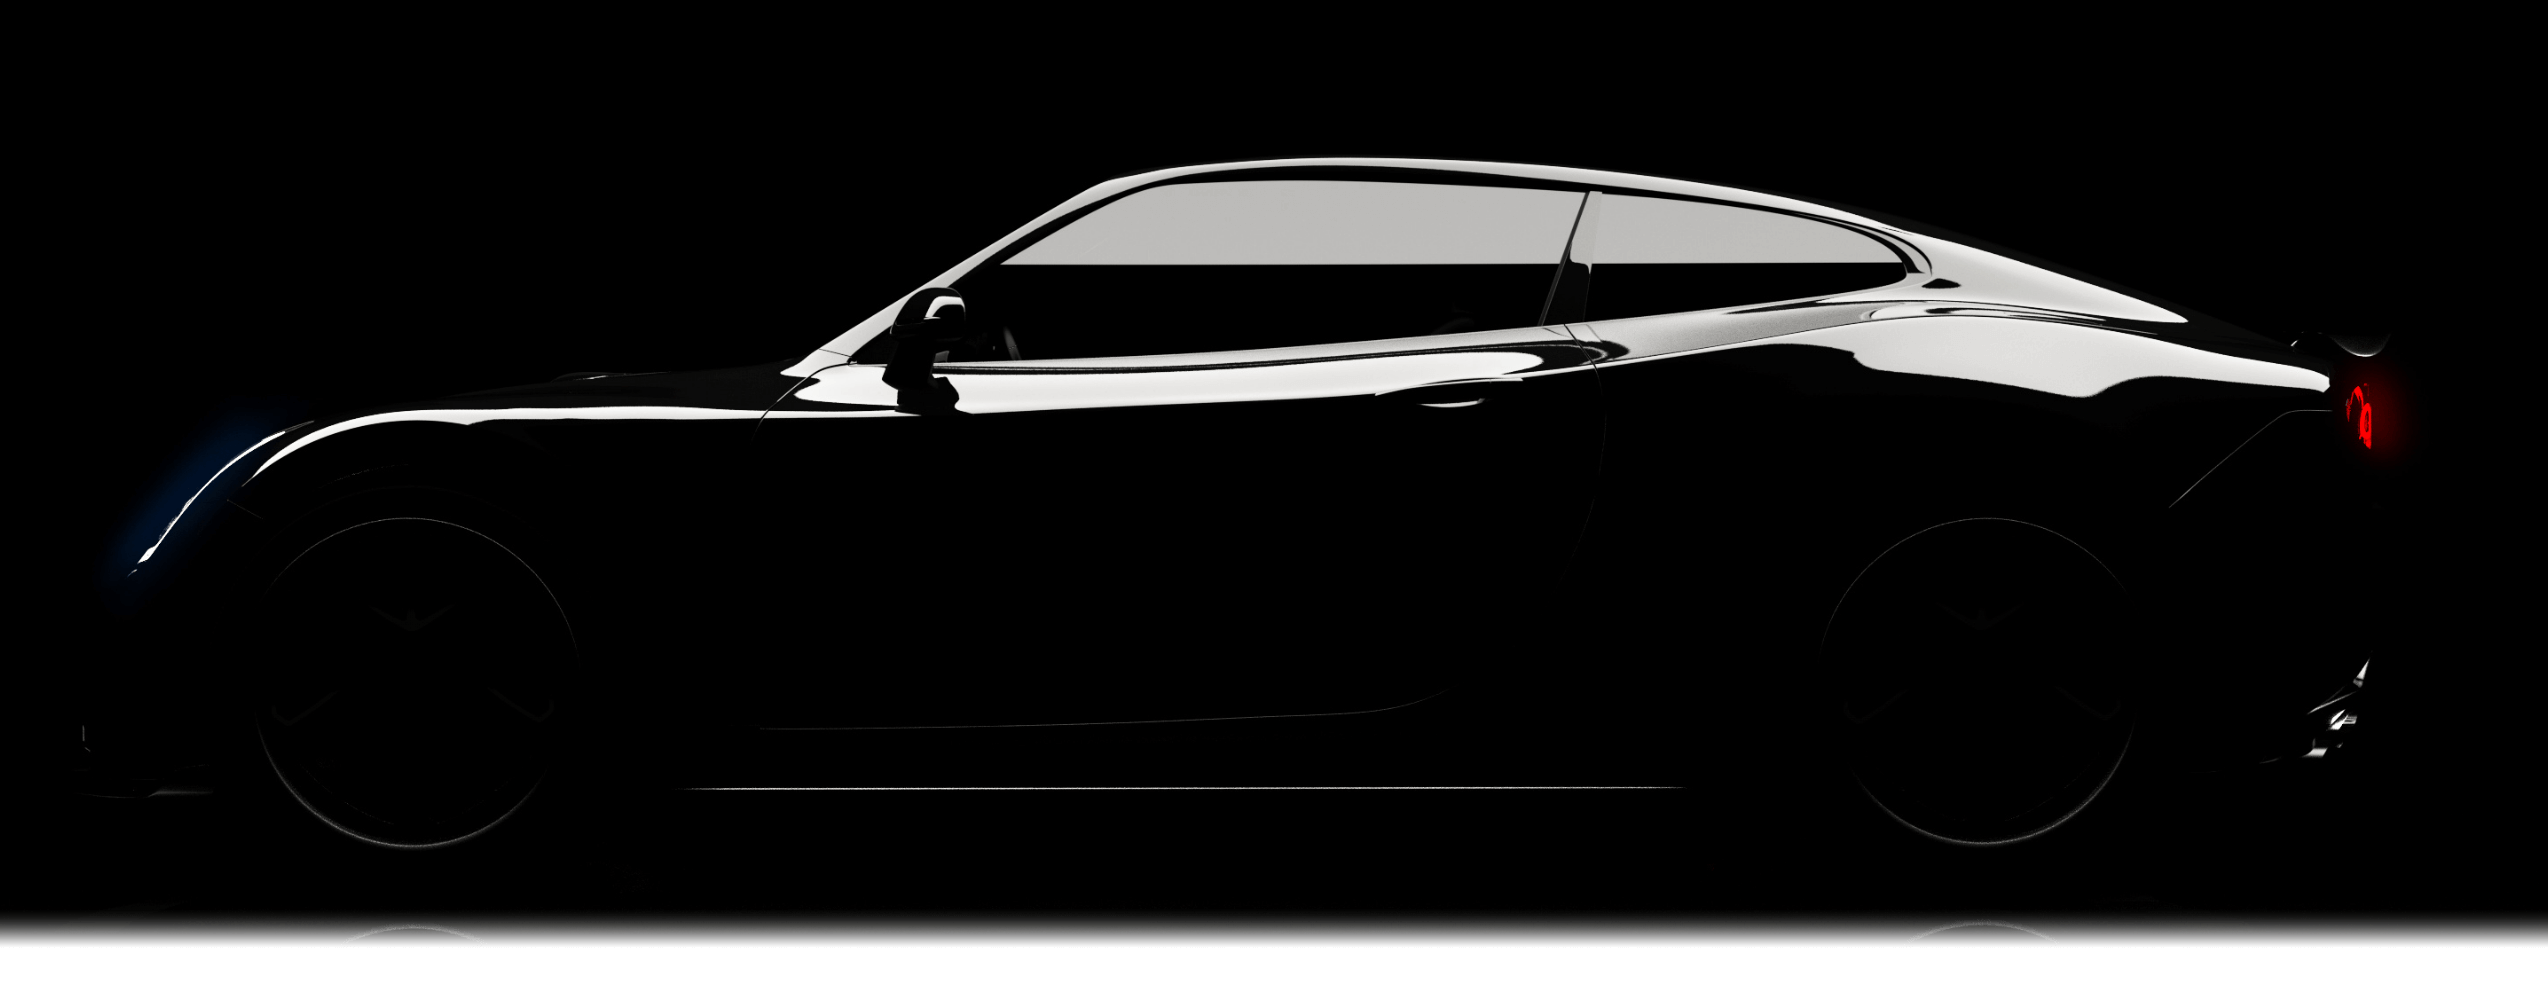 Silhouette of a car.